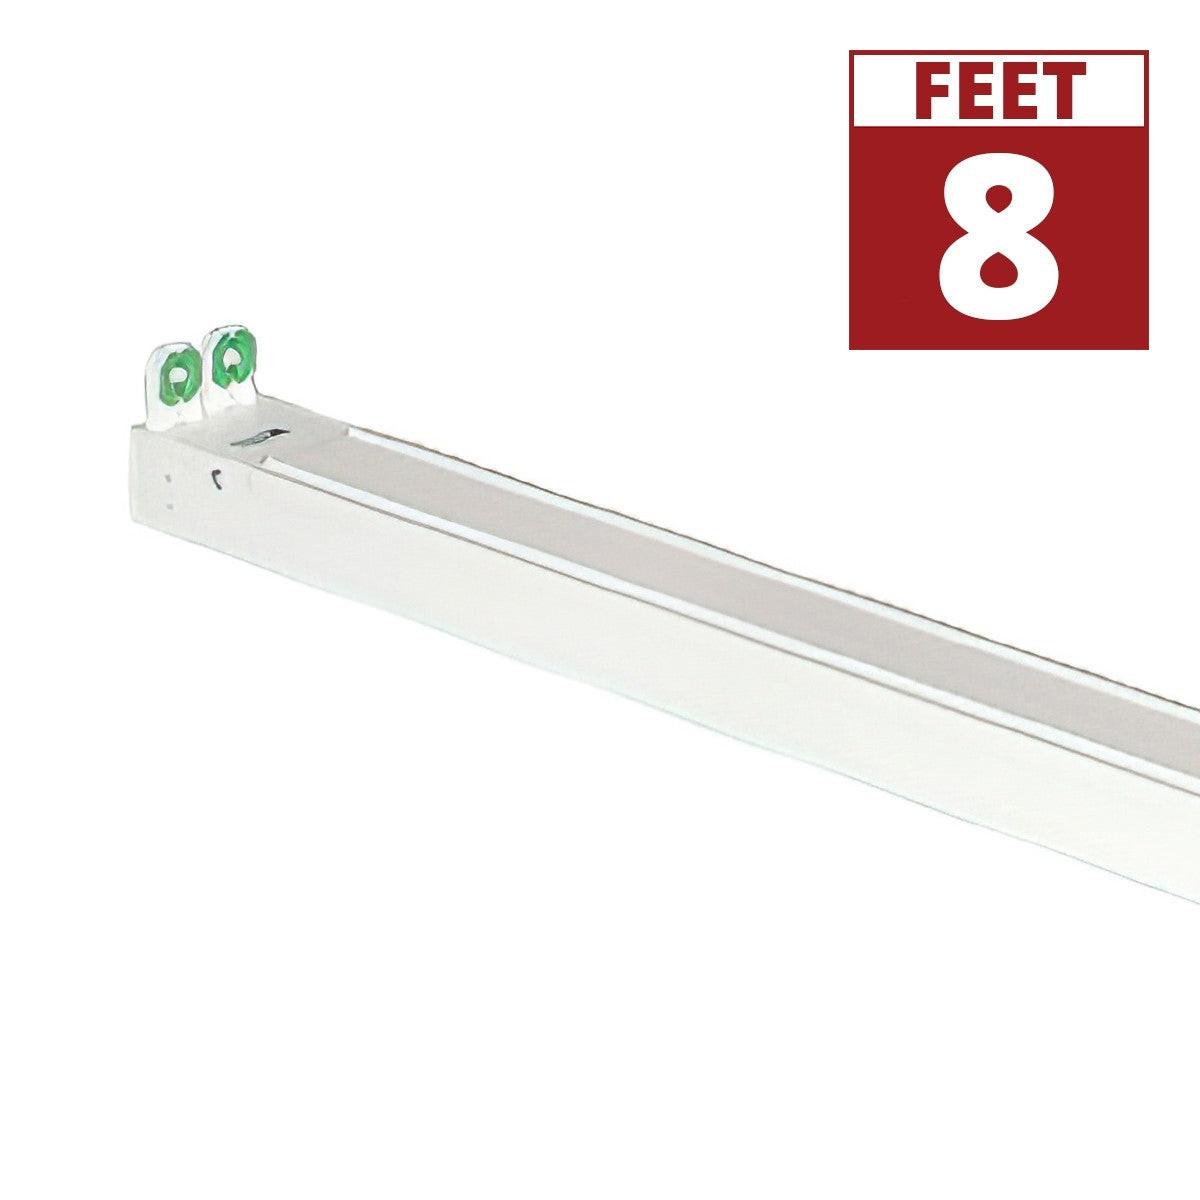 8ft LED Ready Strip Light 4-lamp Double End Wiring LED T8 Bulbs Not Included